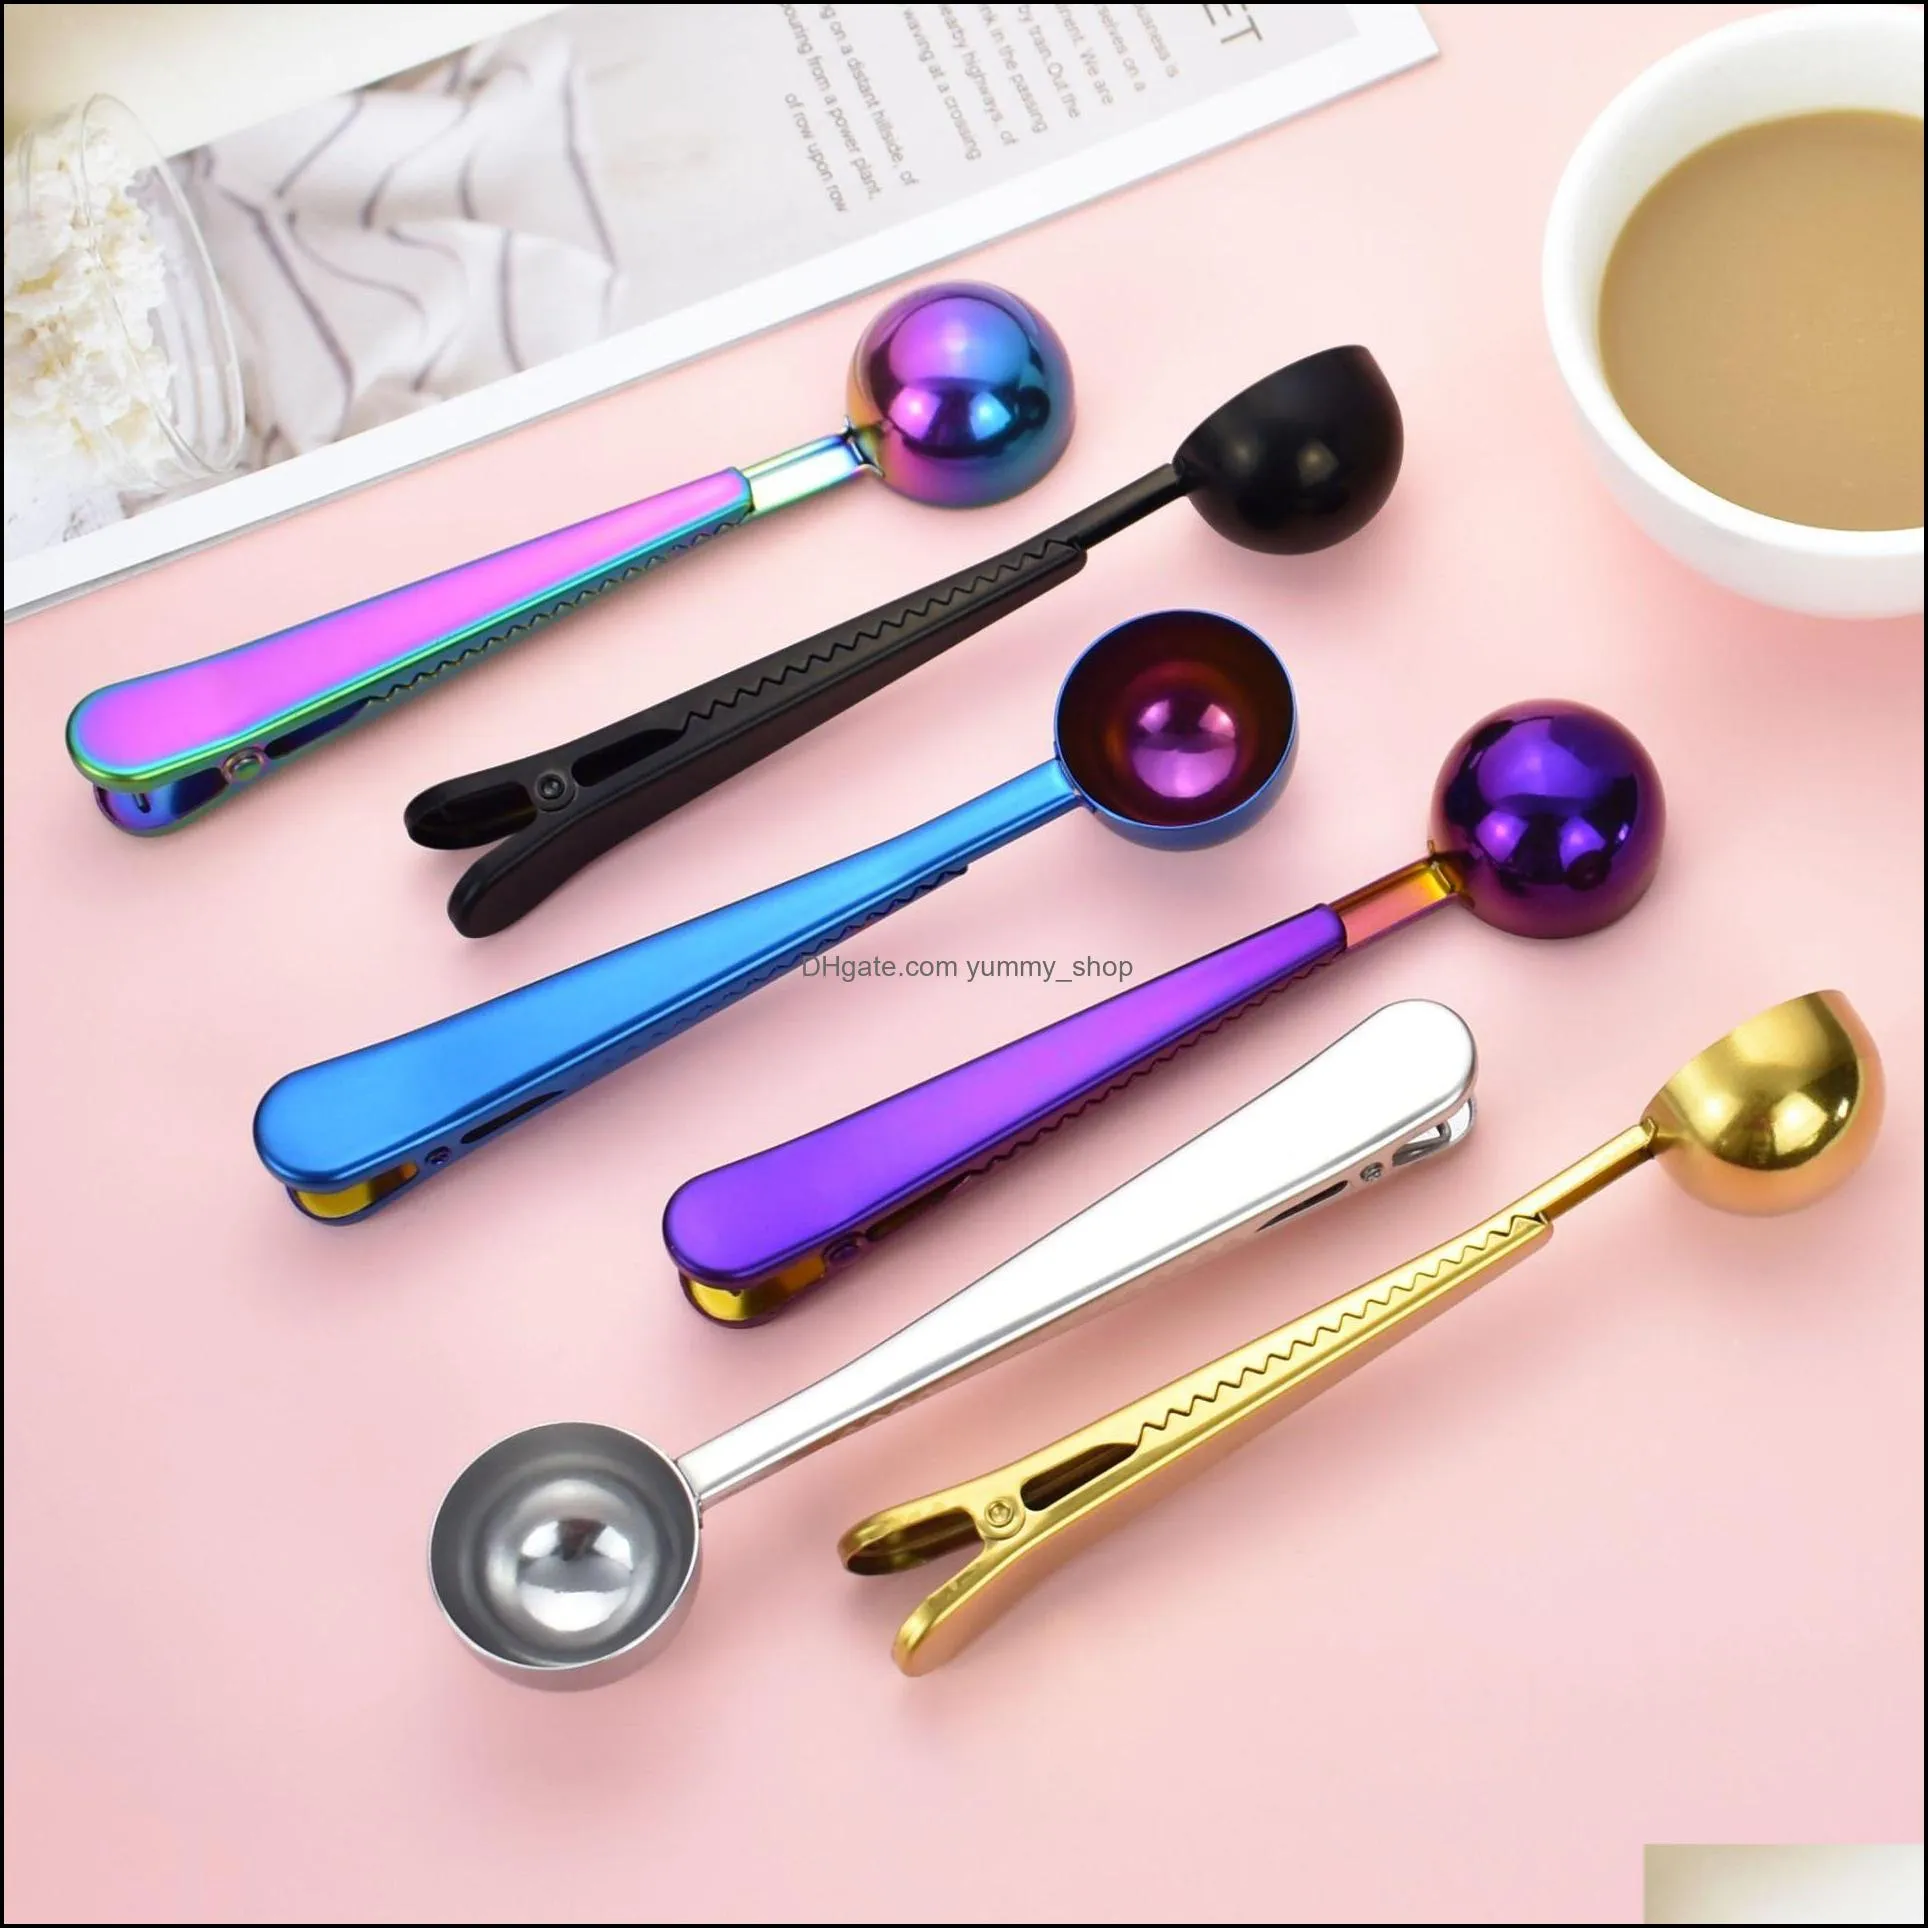 newstainless steel coffee measuring spoon with bag seal clip multifunction jelly ice cream fruit scoop spoon kitchen accessories